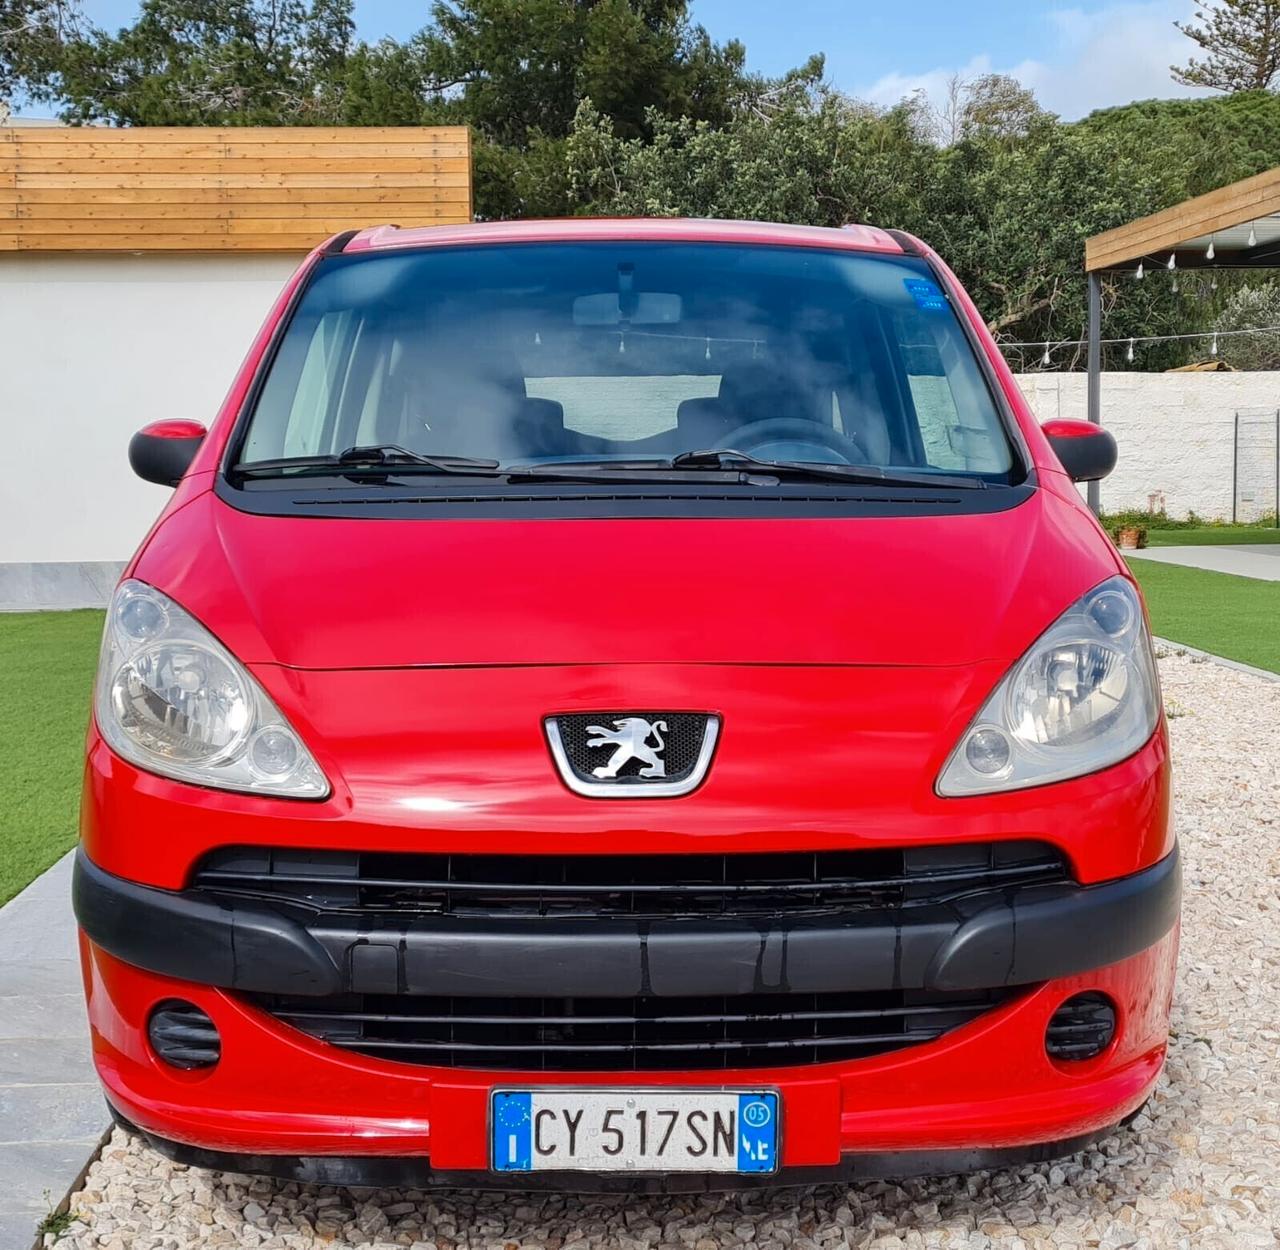 Peugeot 1007 1.4 HDi Dolce